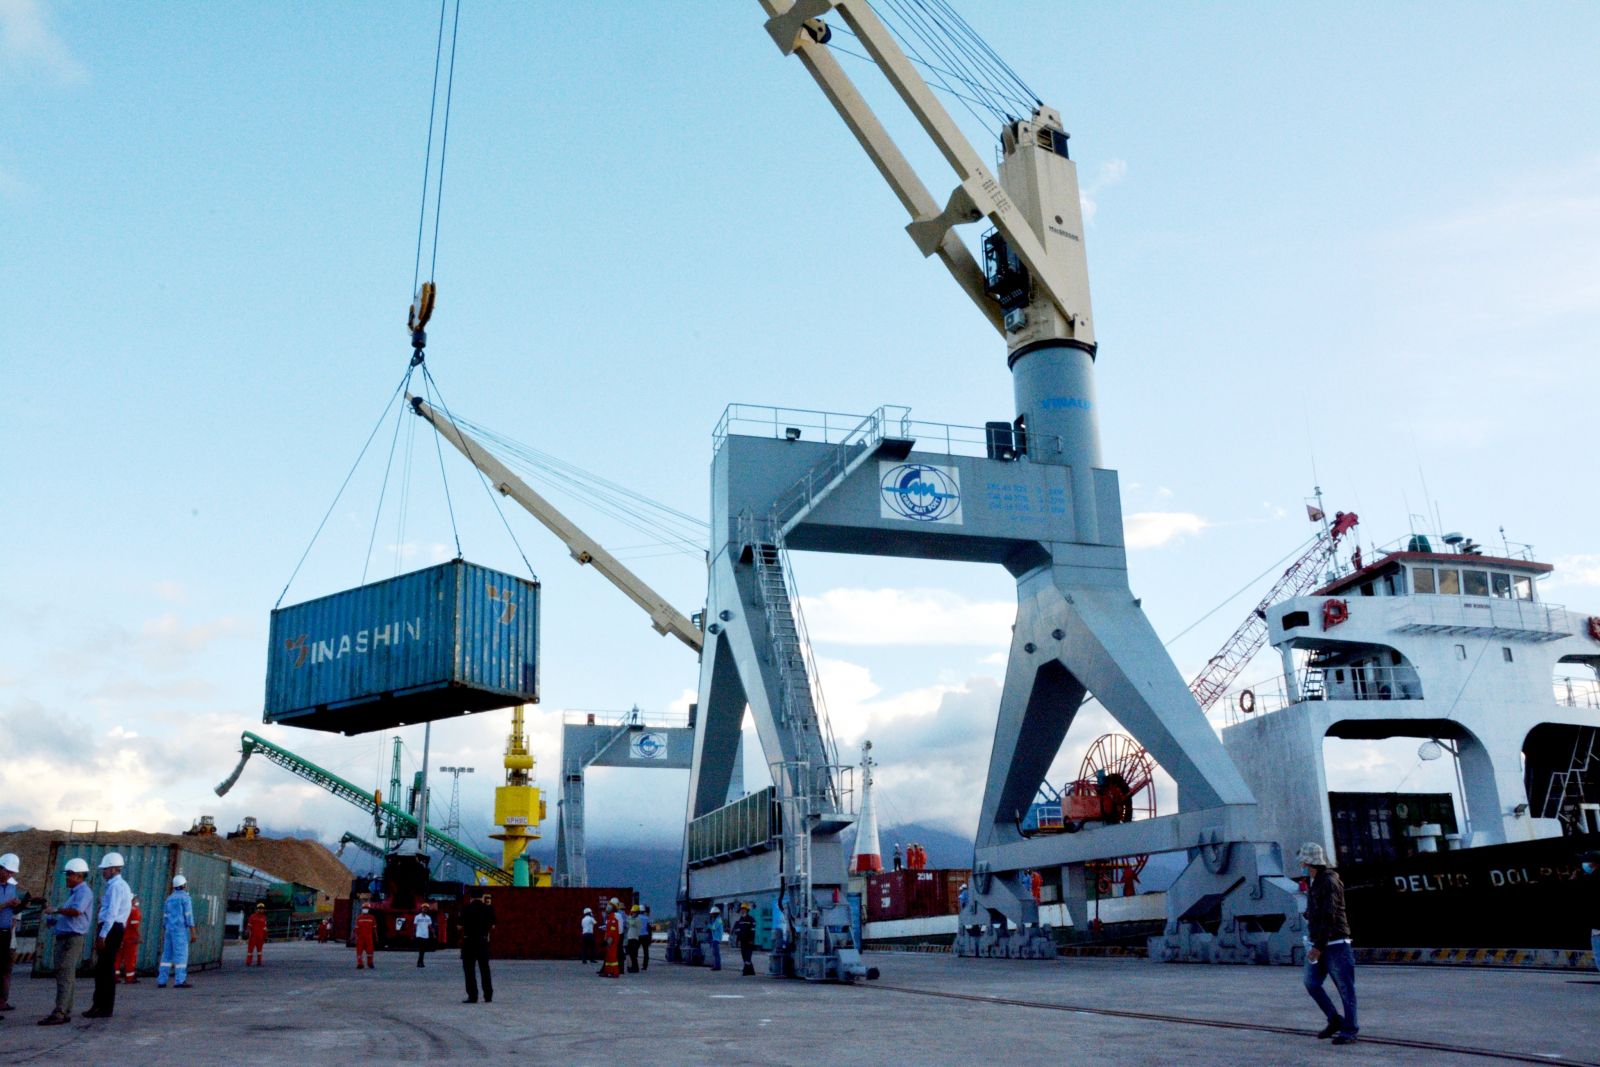 Currently, Chan May port has been qualified to become the first deep-water seaport to receive and load domestic and international container ships in the North Central region